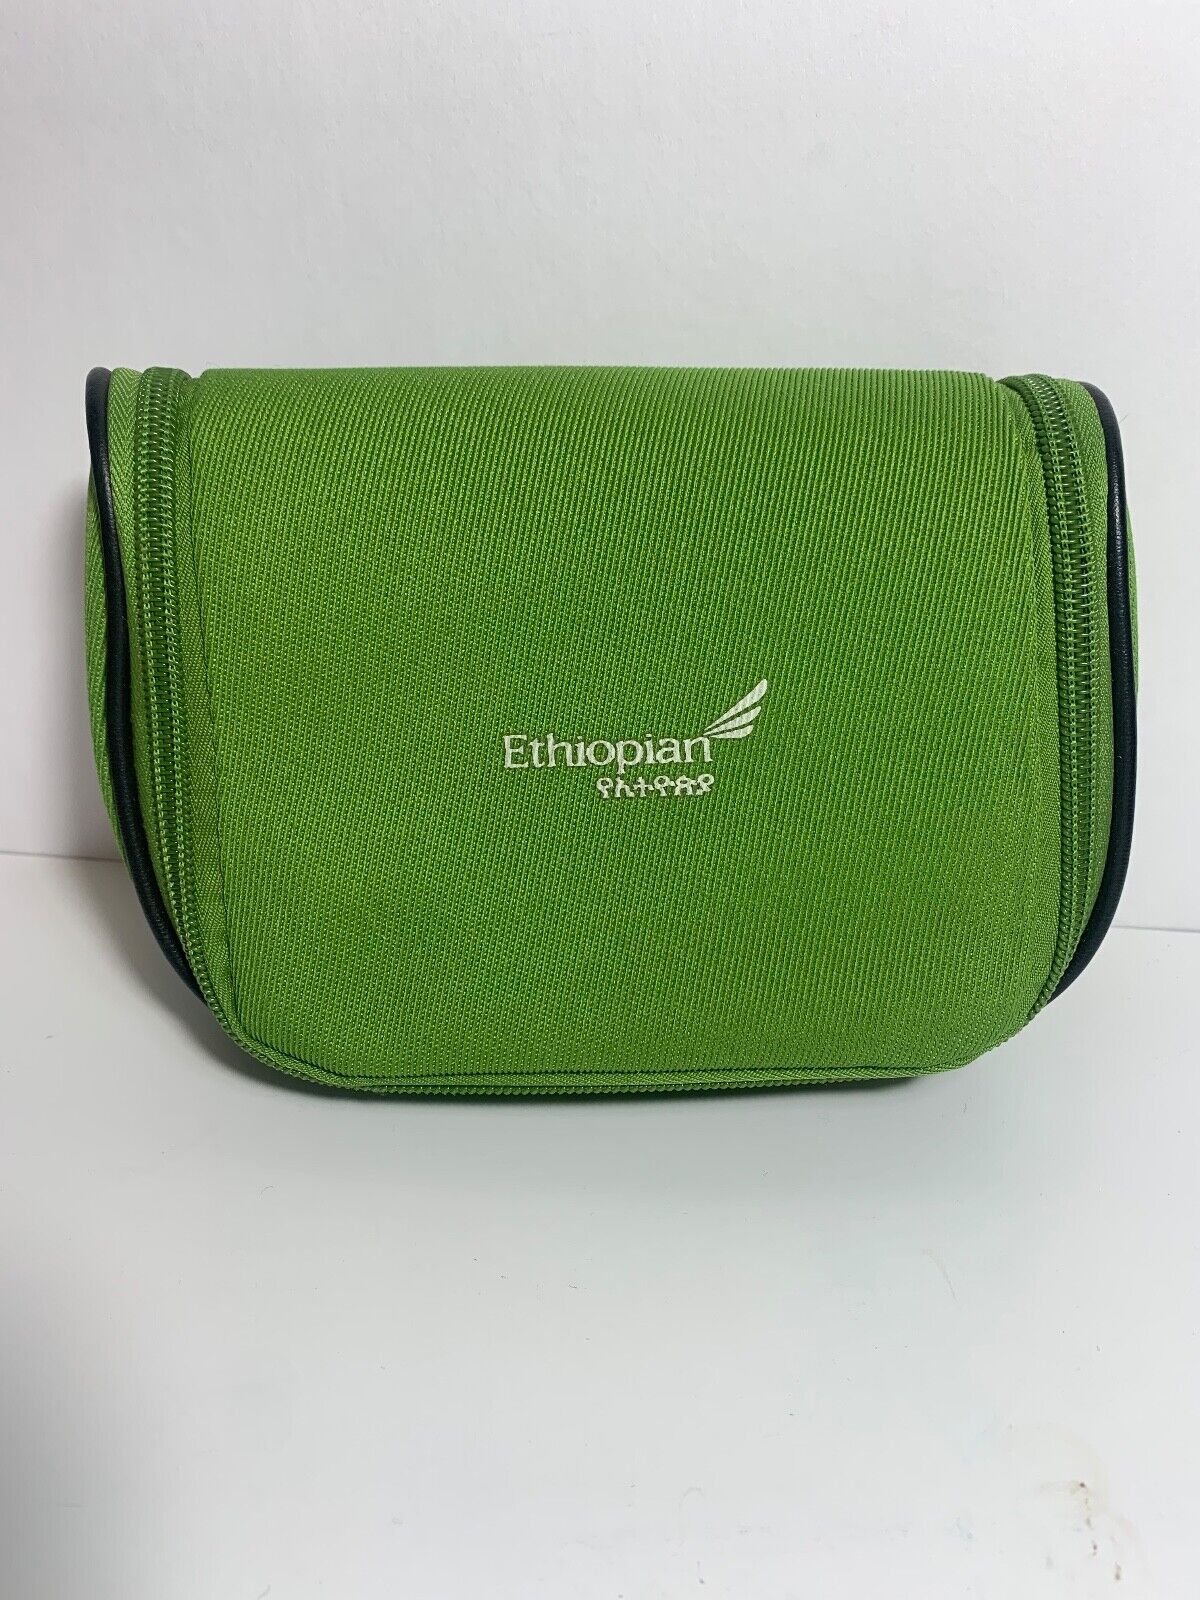 Ethiopian Airlines Business Class Amenity Kit - green zippered bag with hanger